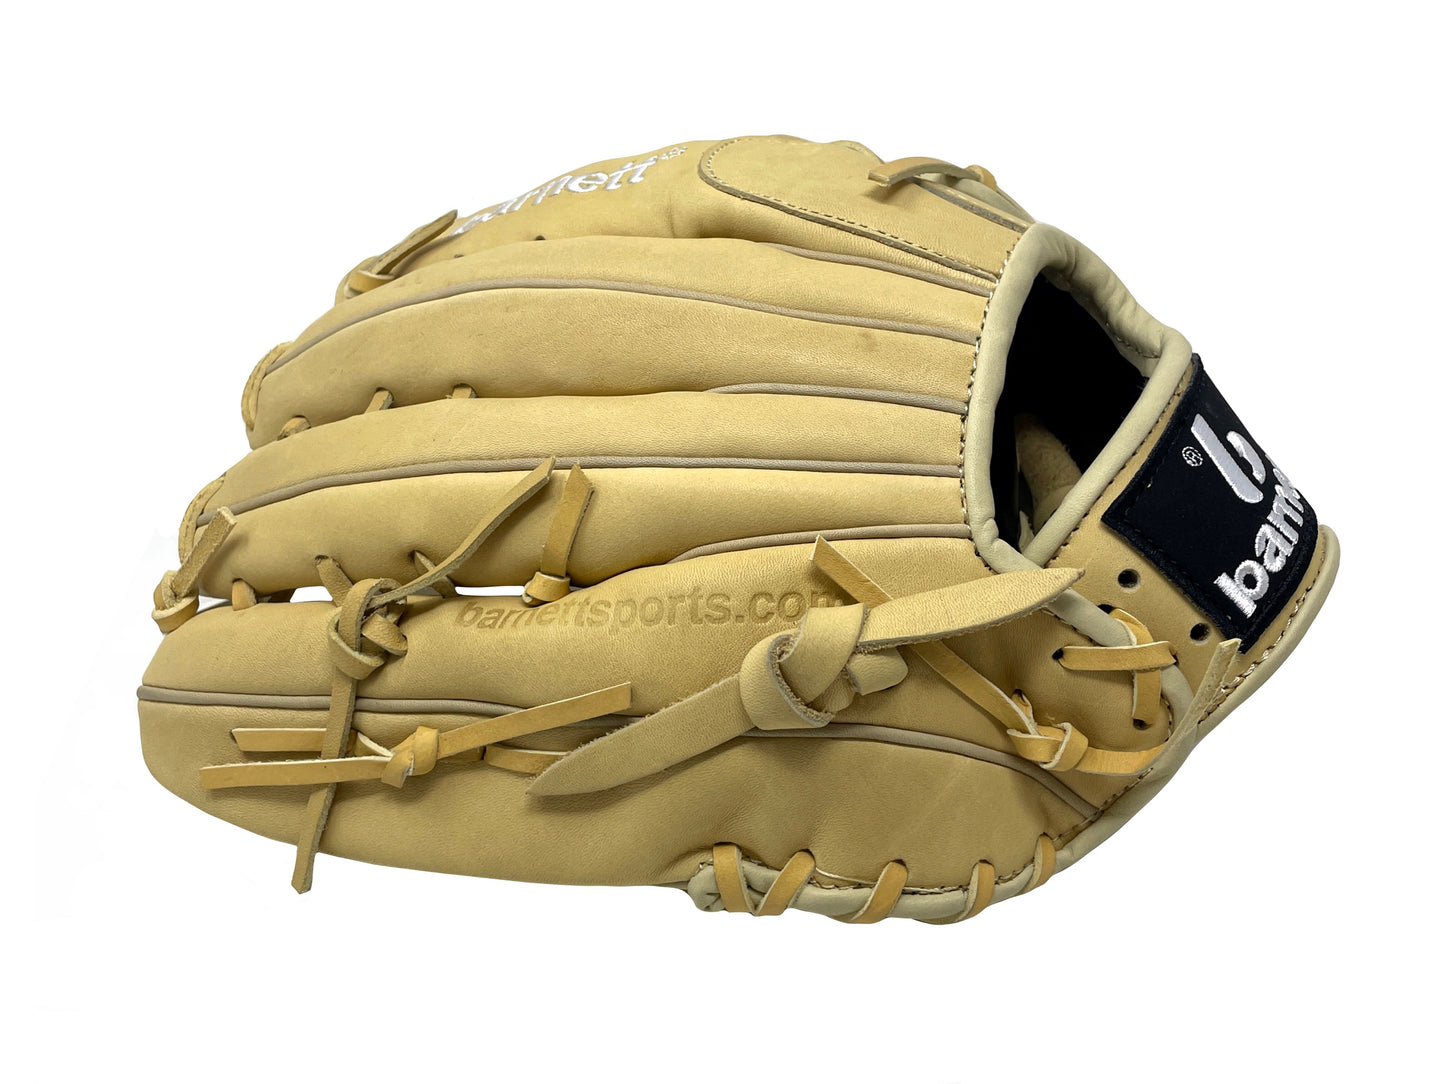 FL-127 high quality leather baseball glove, infield / outfield / pitcher, Beige